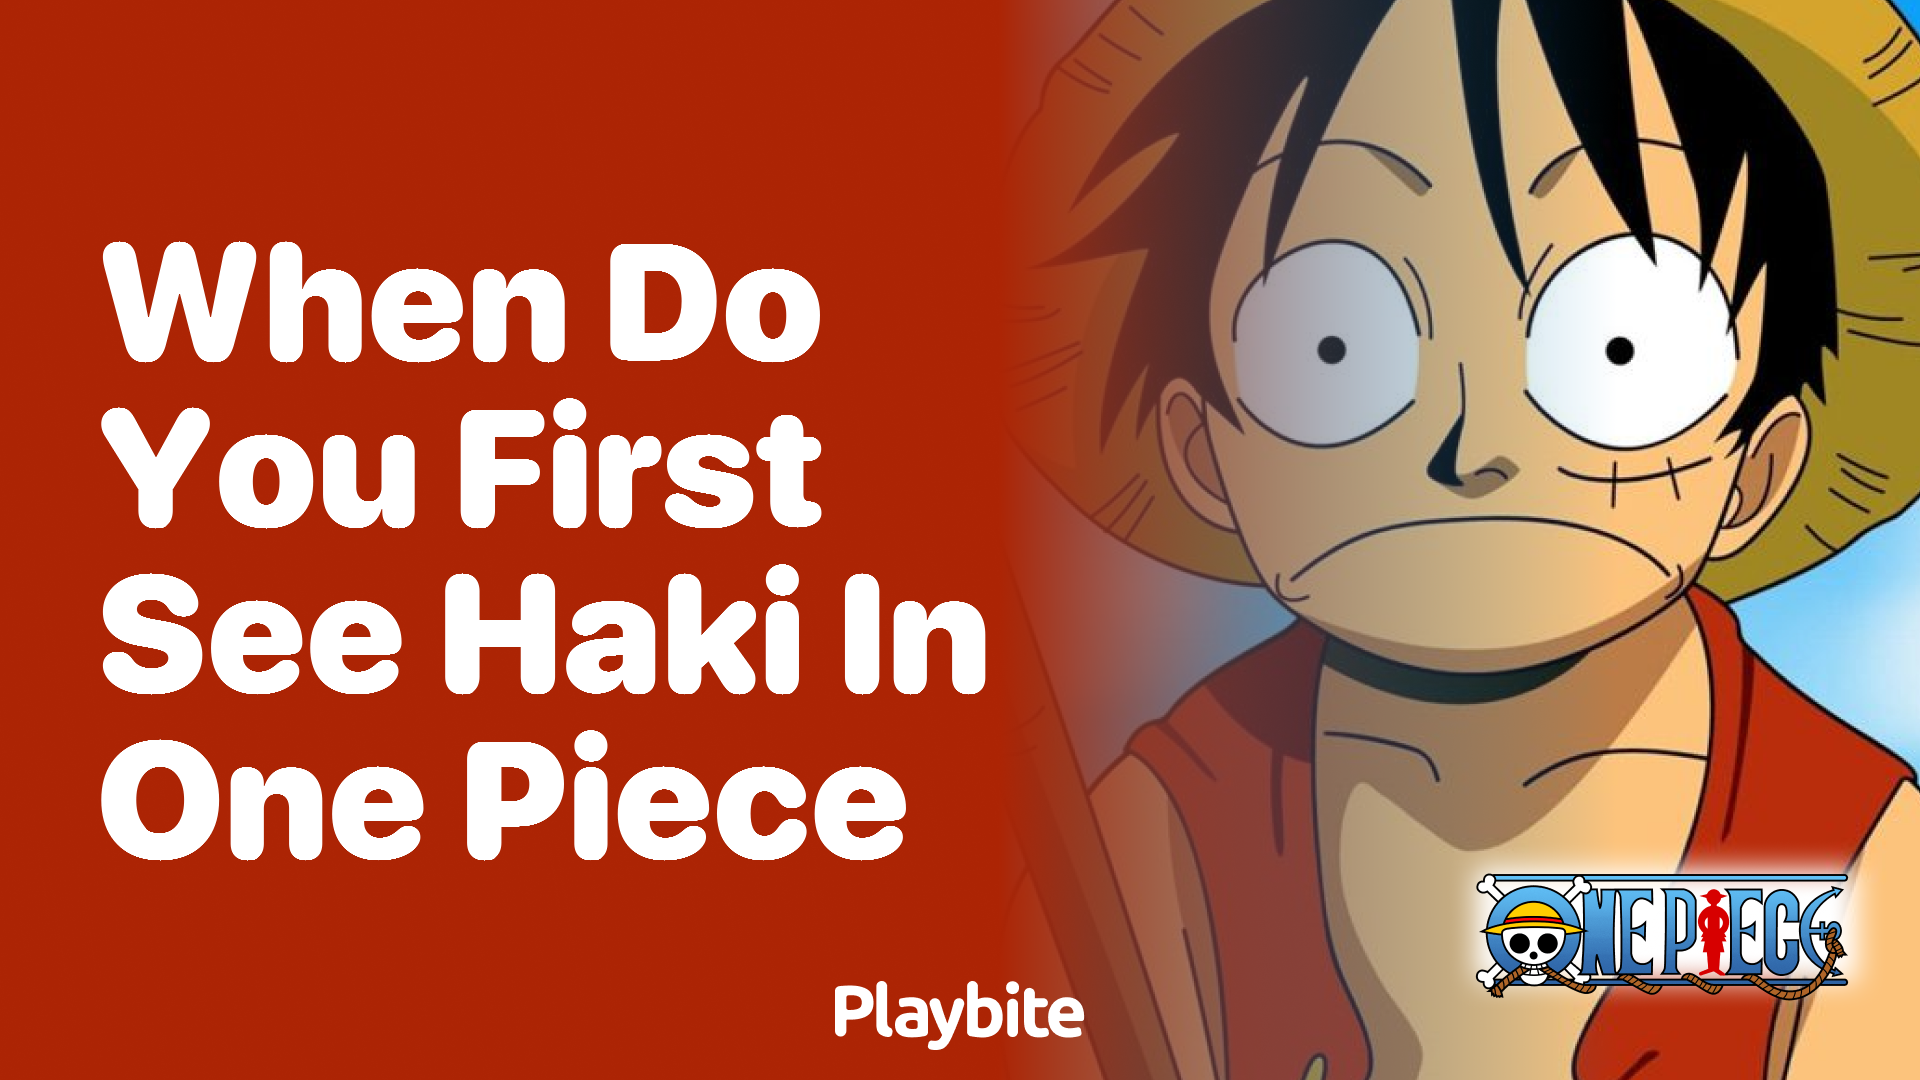 When do you first see Haki in One Piece?